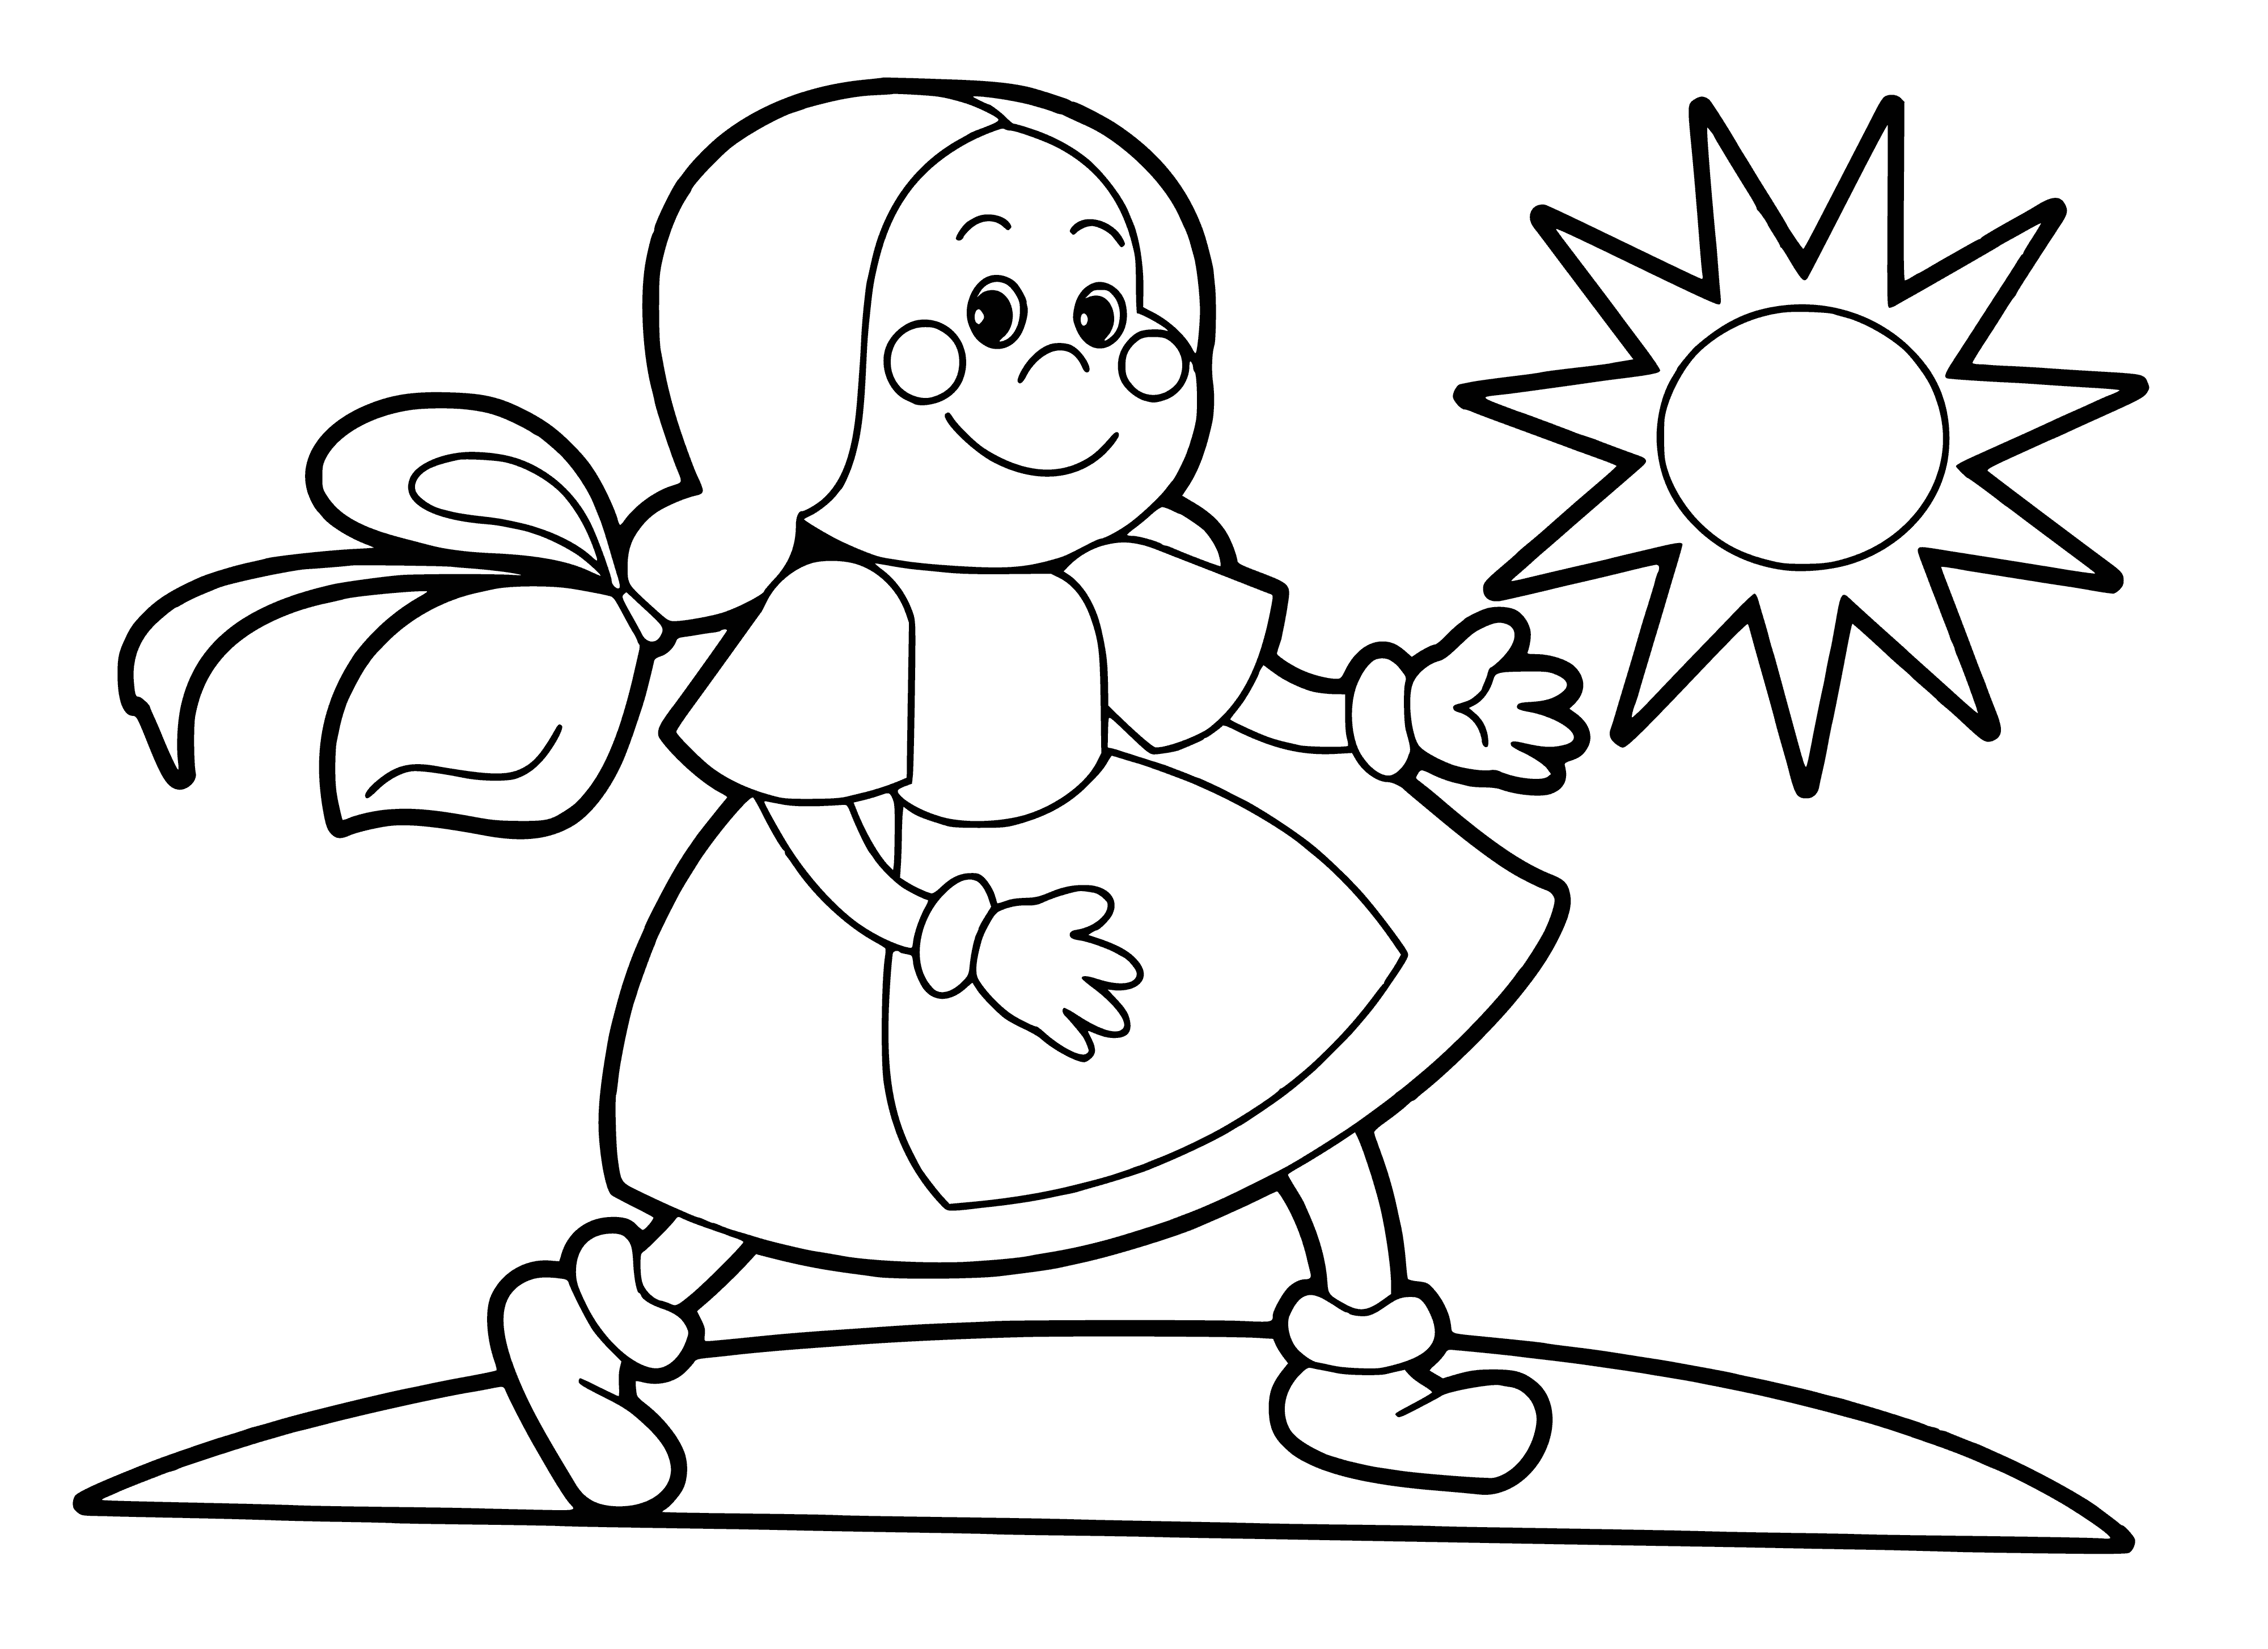 coloring page: Little girl plays outside on sunny day, surrounded by flowers & trees. #summerfun